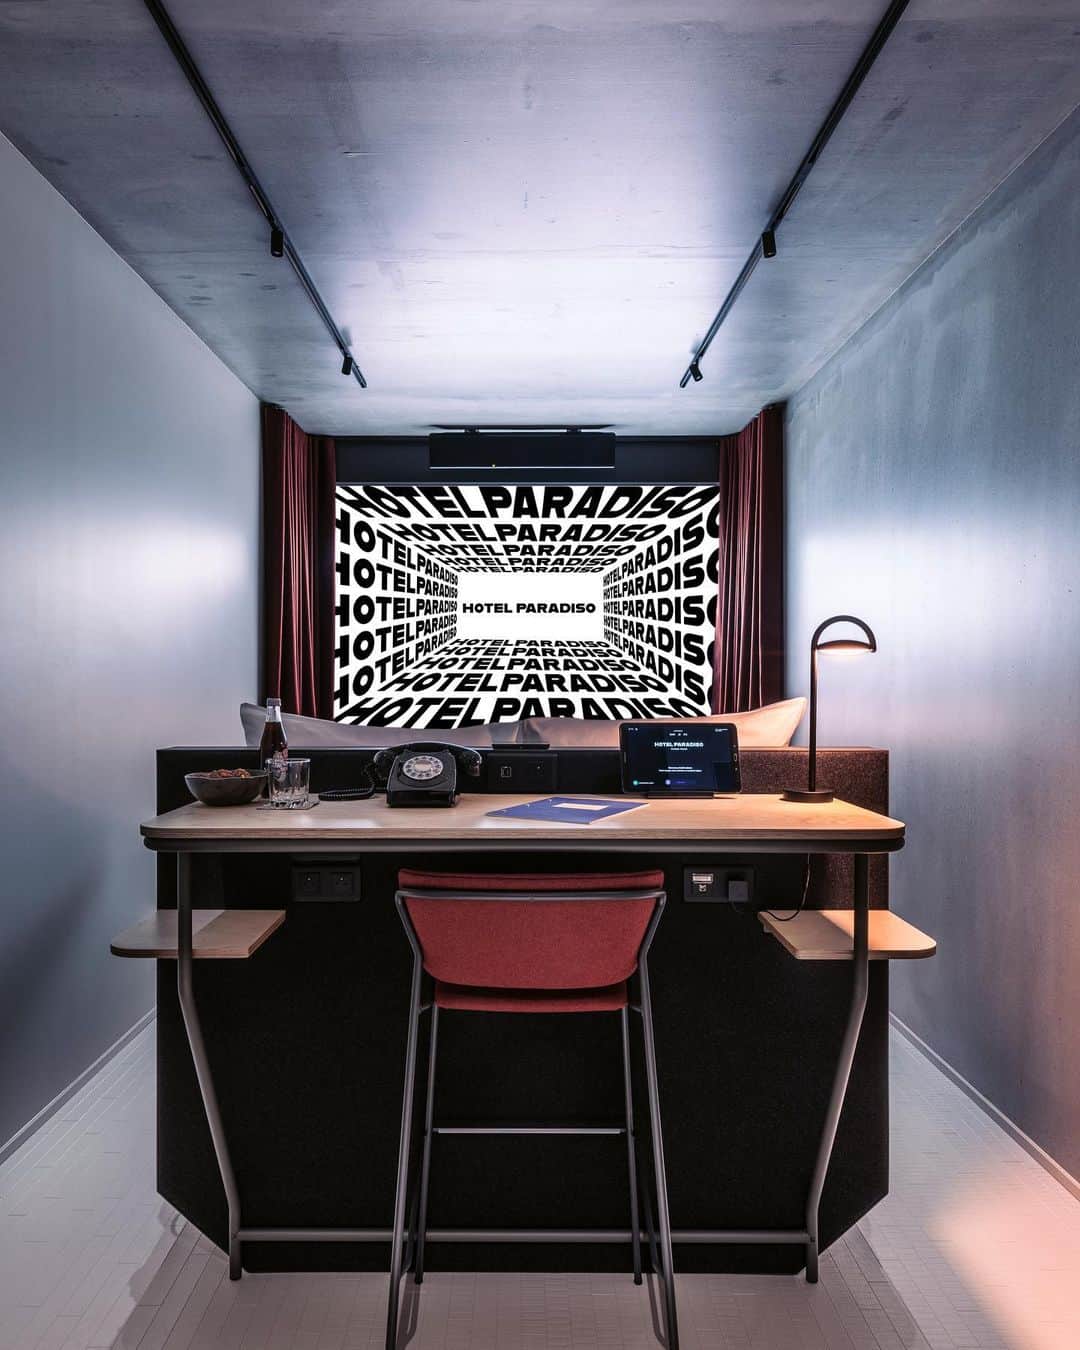 Vogue Parisのインスタグラム：「#VogueAddressBook Cinema lovers in Paris just got some good news: MK2 has opened the city’s first cinema hotel! The @MK2HotelParadiso is the work of two bothers Nathanaël and Elisha Karmitz and comprises 6 classic auditoriums, 34 bedrooms and 2 suites that can all transform into private cinemas, as well as a rooftop terrace featuring yet another big screen. With creative input from a host of names like Alexandre Mattiussi, @WoodkidMusic and @ThomsenStudio, this new hotspot is set to be one of Paris’s coolest places to spend a night for Parisians and visitors alike.」